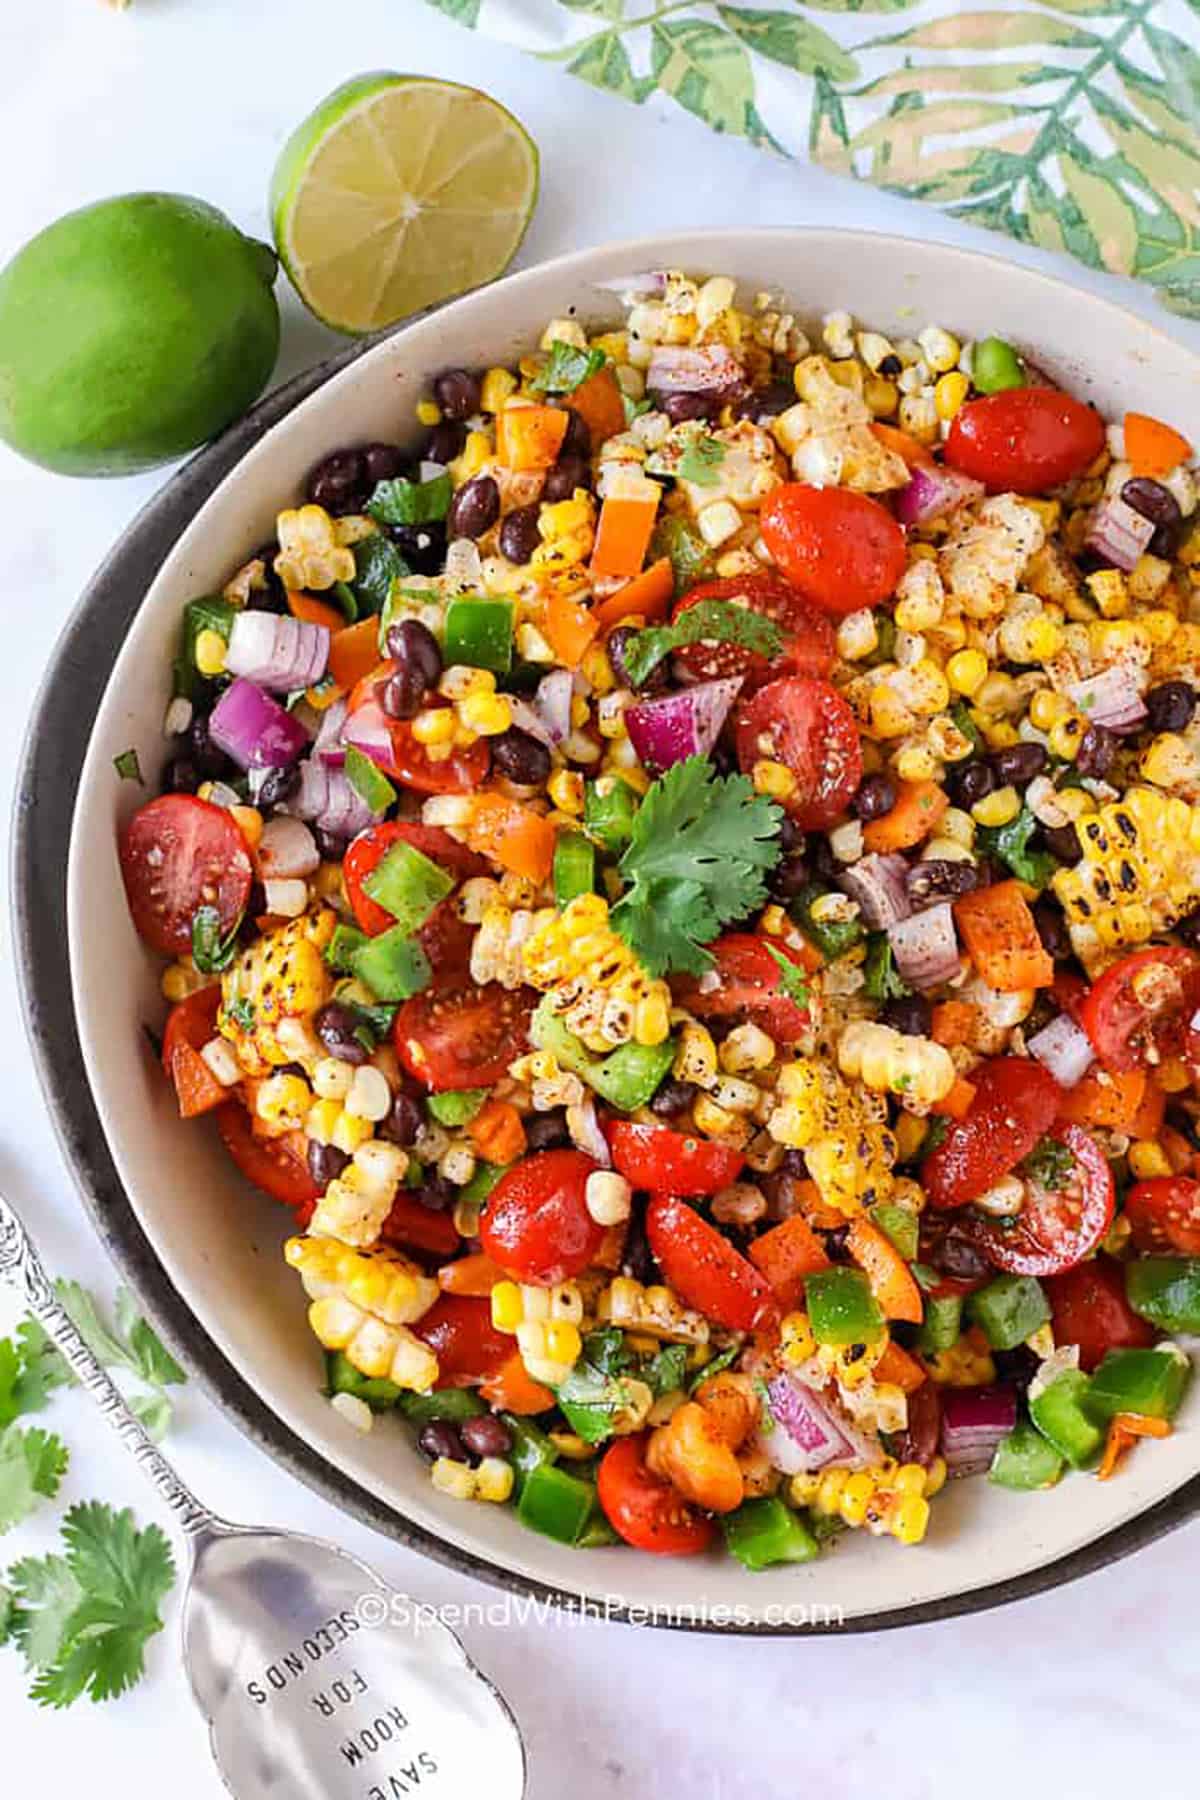 Black Bean and Corn Salad from https://www.spendwithpennies.com/